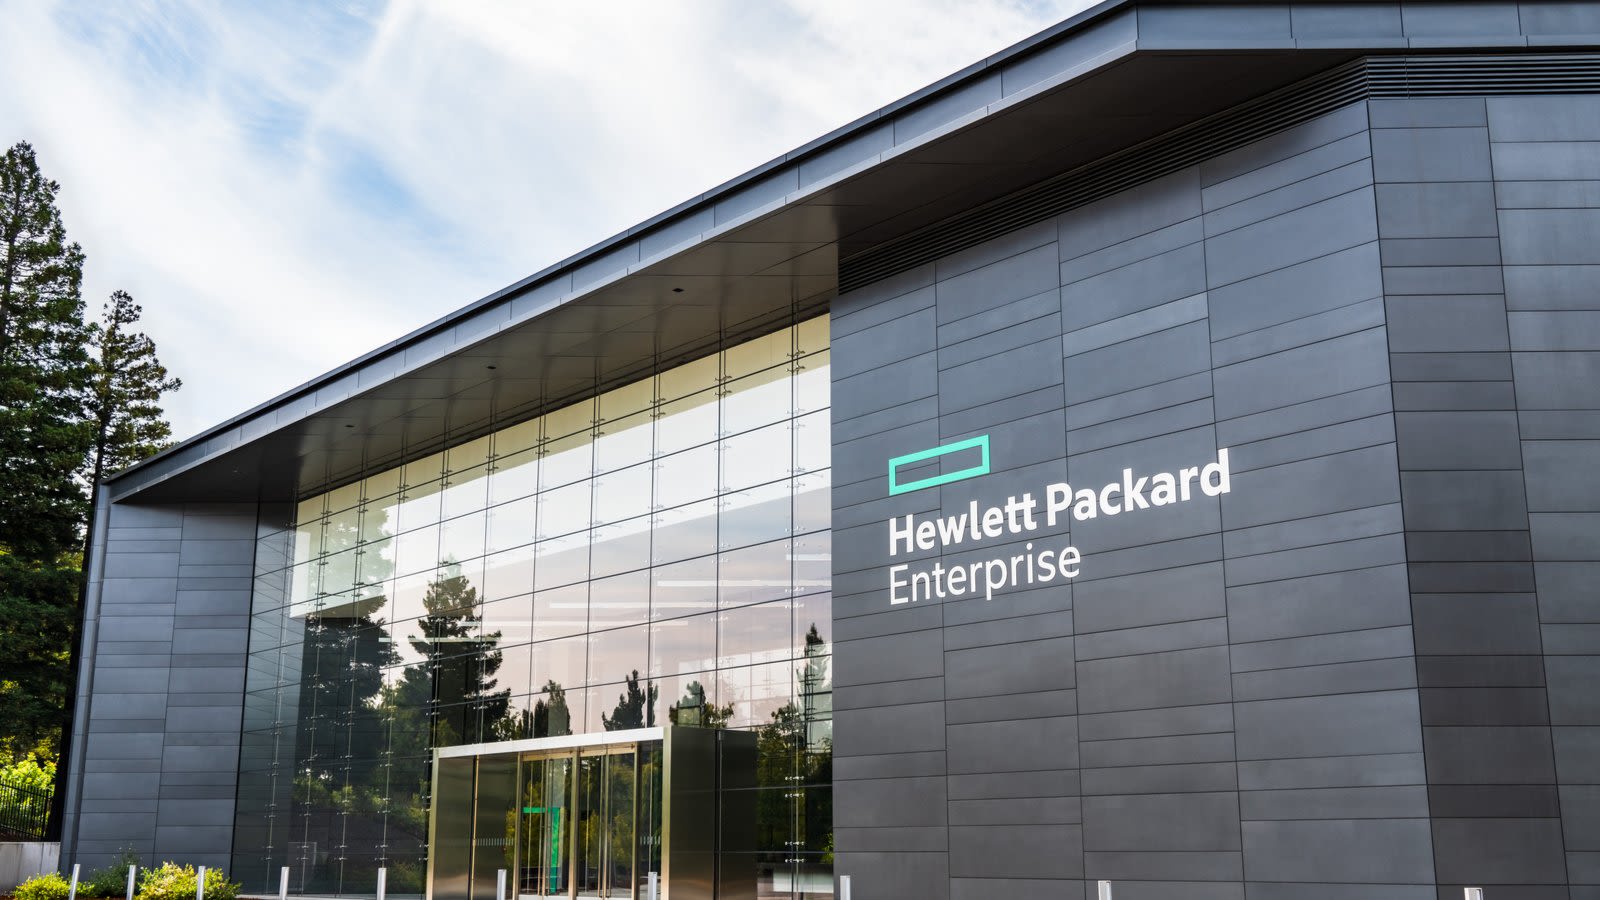 Whoa! HPE Stock Is the Top Tech Pick You Didn't See Coming.